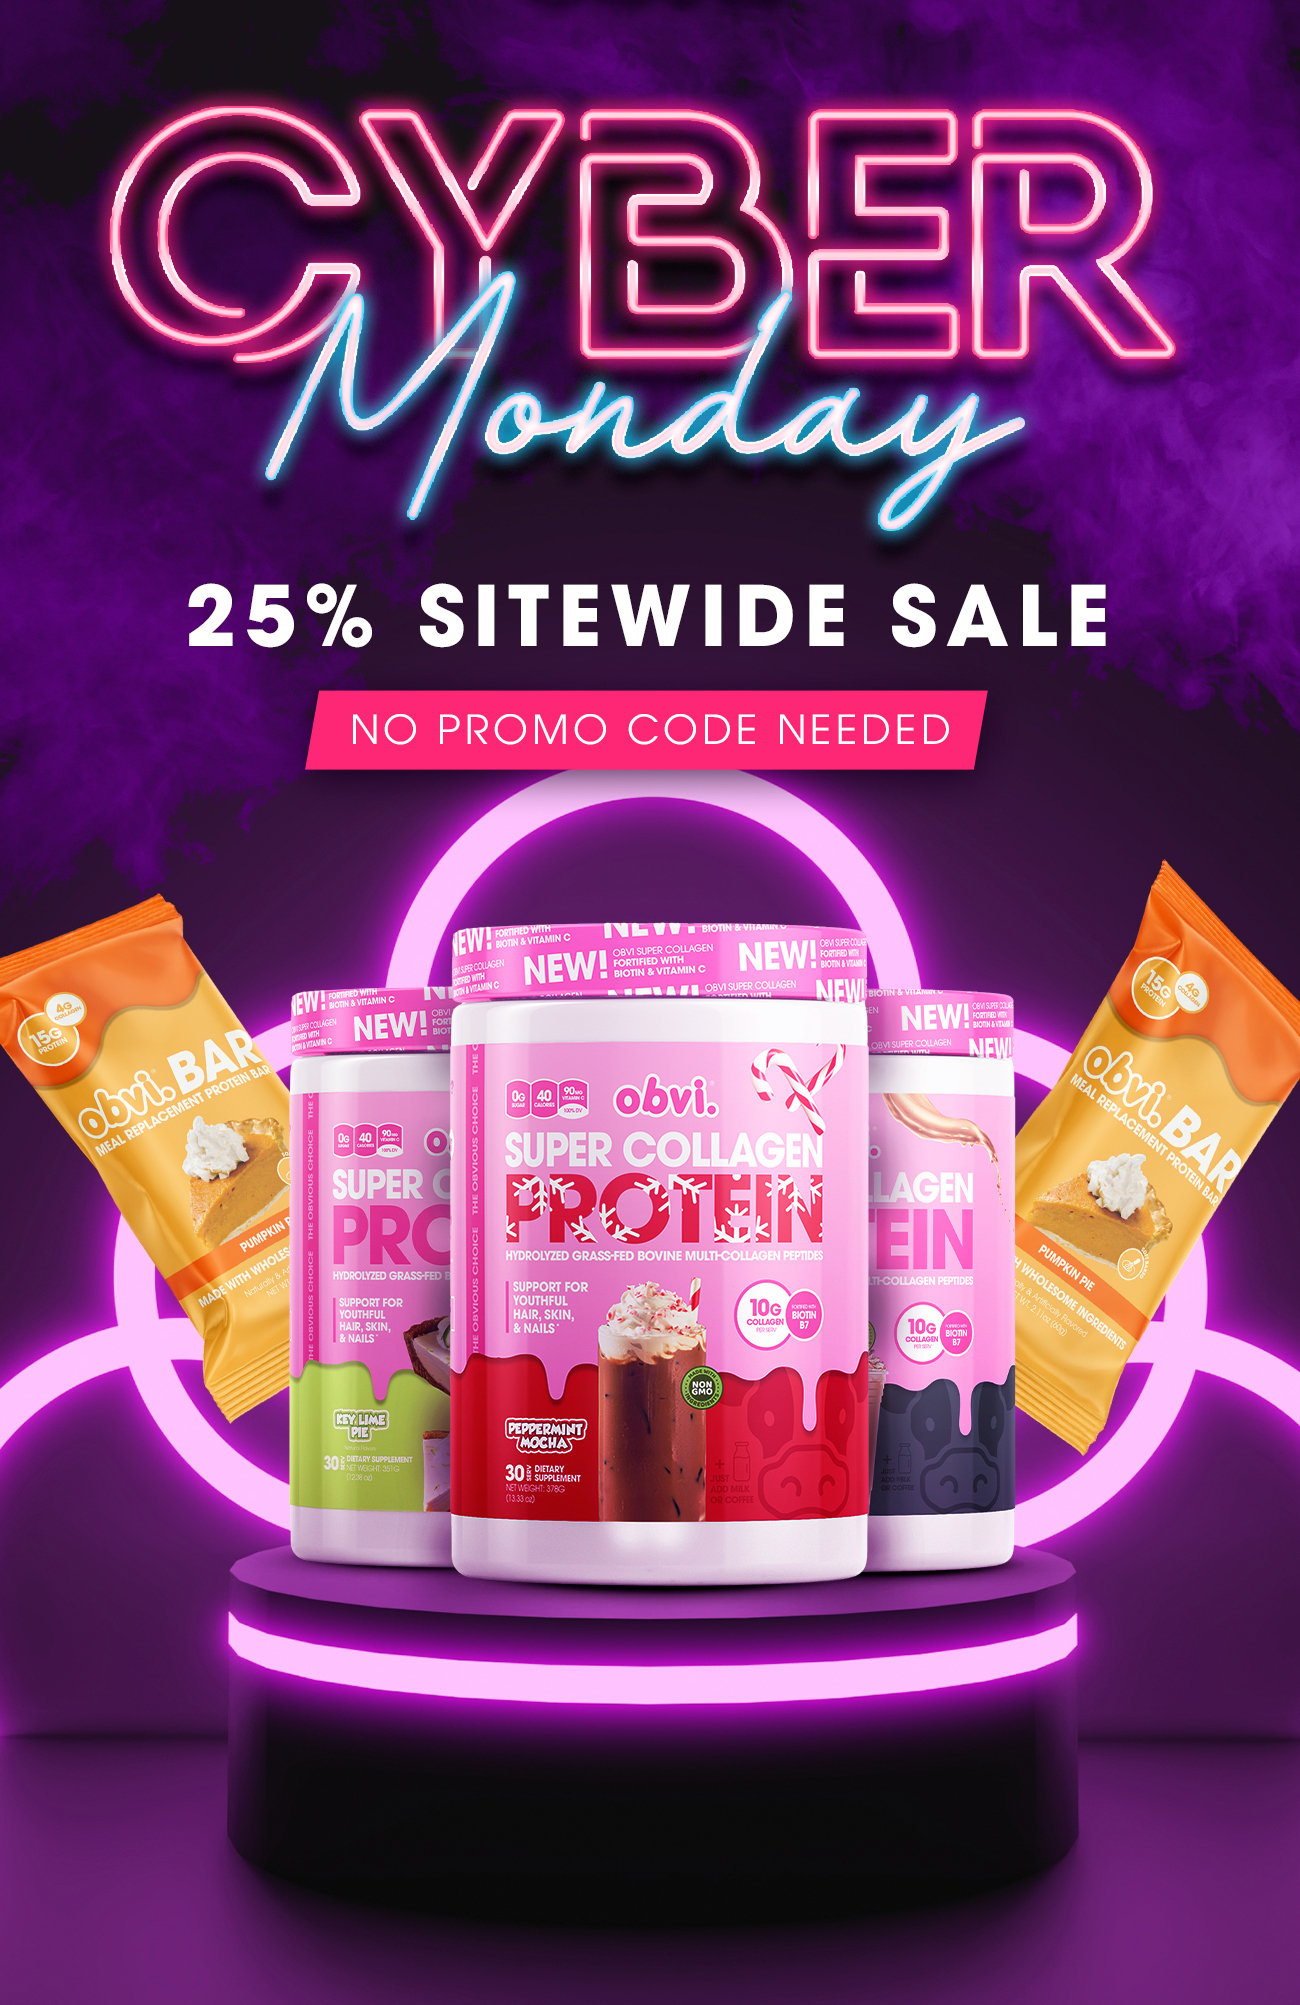 Obvi Cyber Monday 2021 Deal: Get 25% Off Sitewide + 3 Exclusive Gifts!